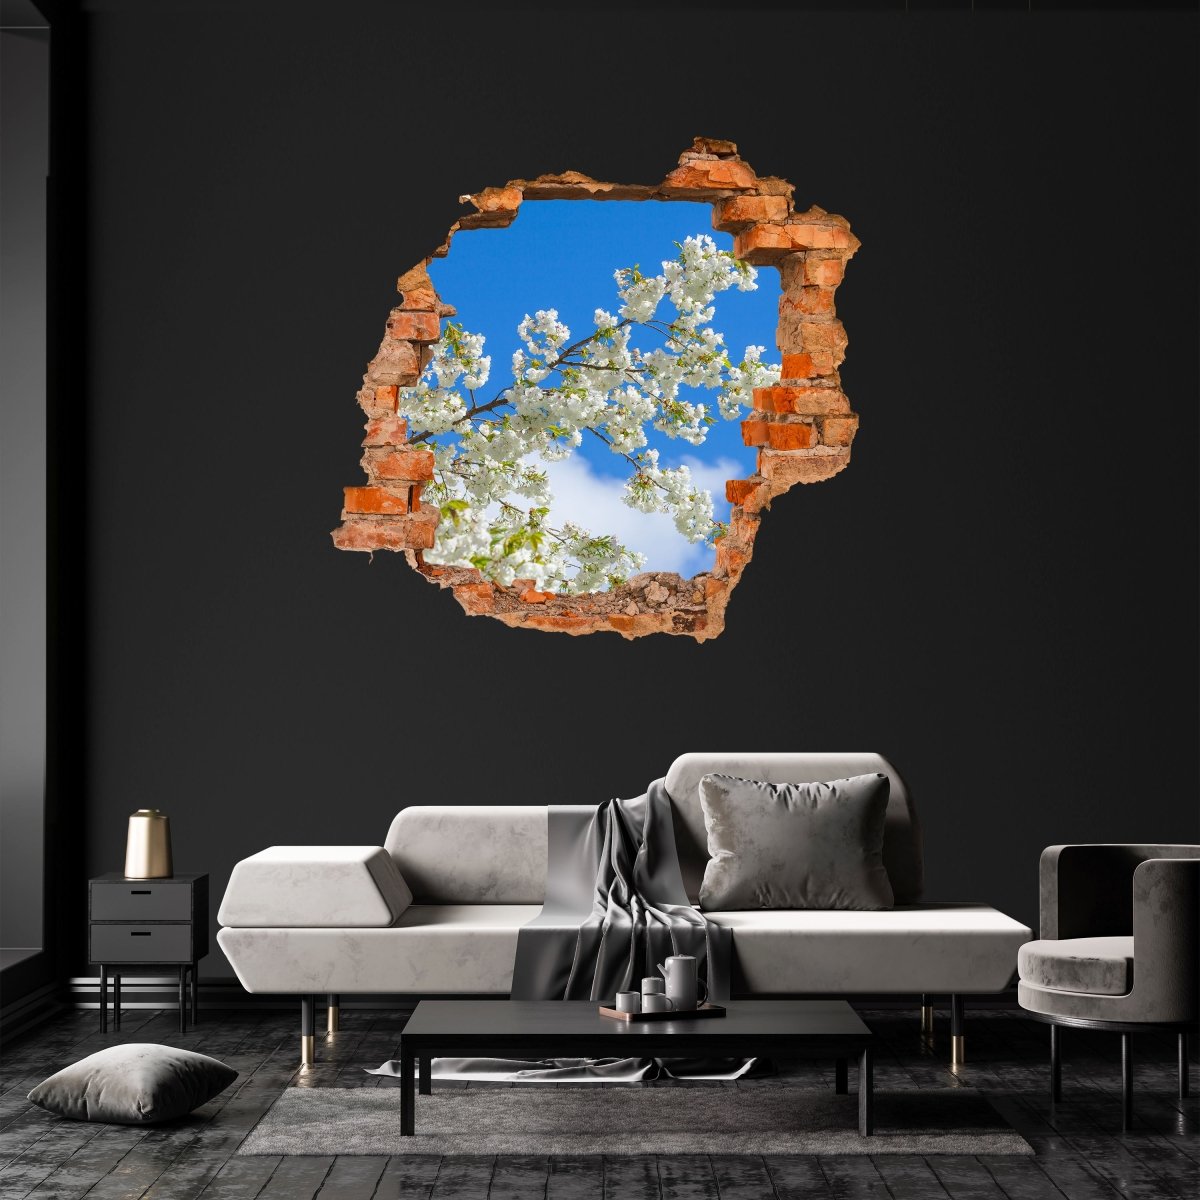 3D wall sticker cherry blossoms in the sun, sky, blue - Wall Decal M1228